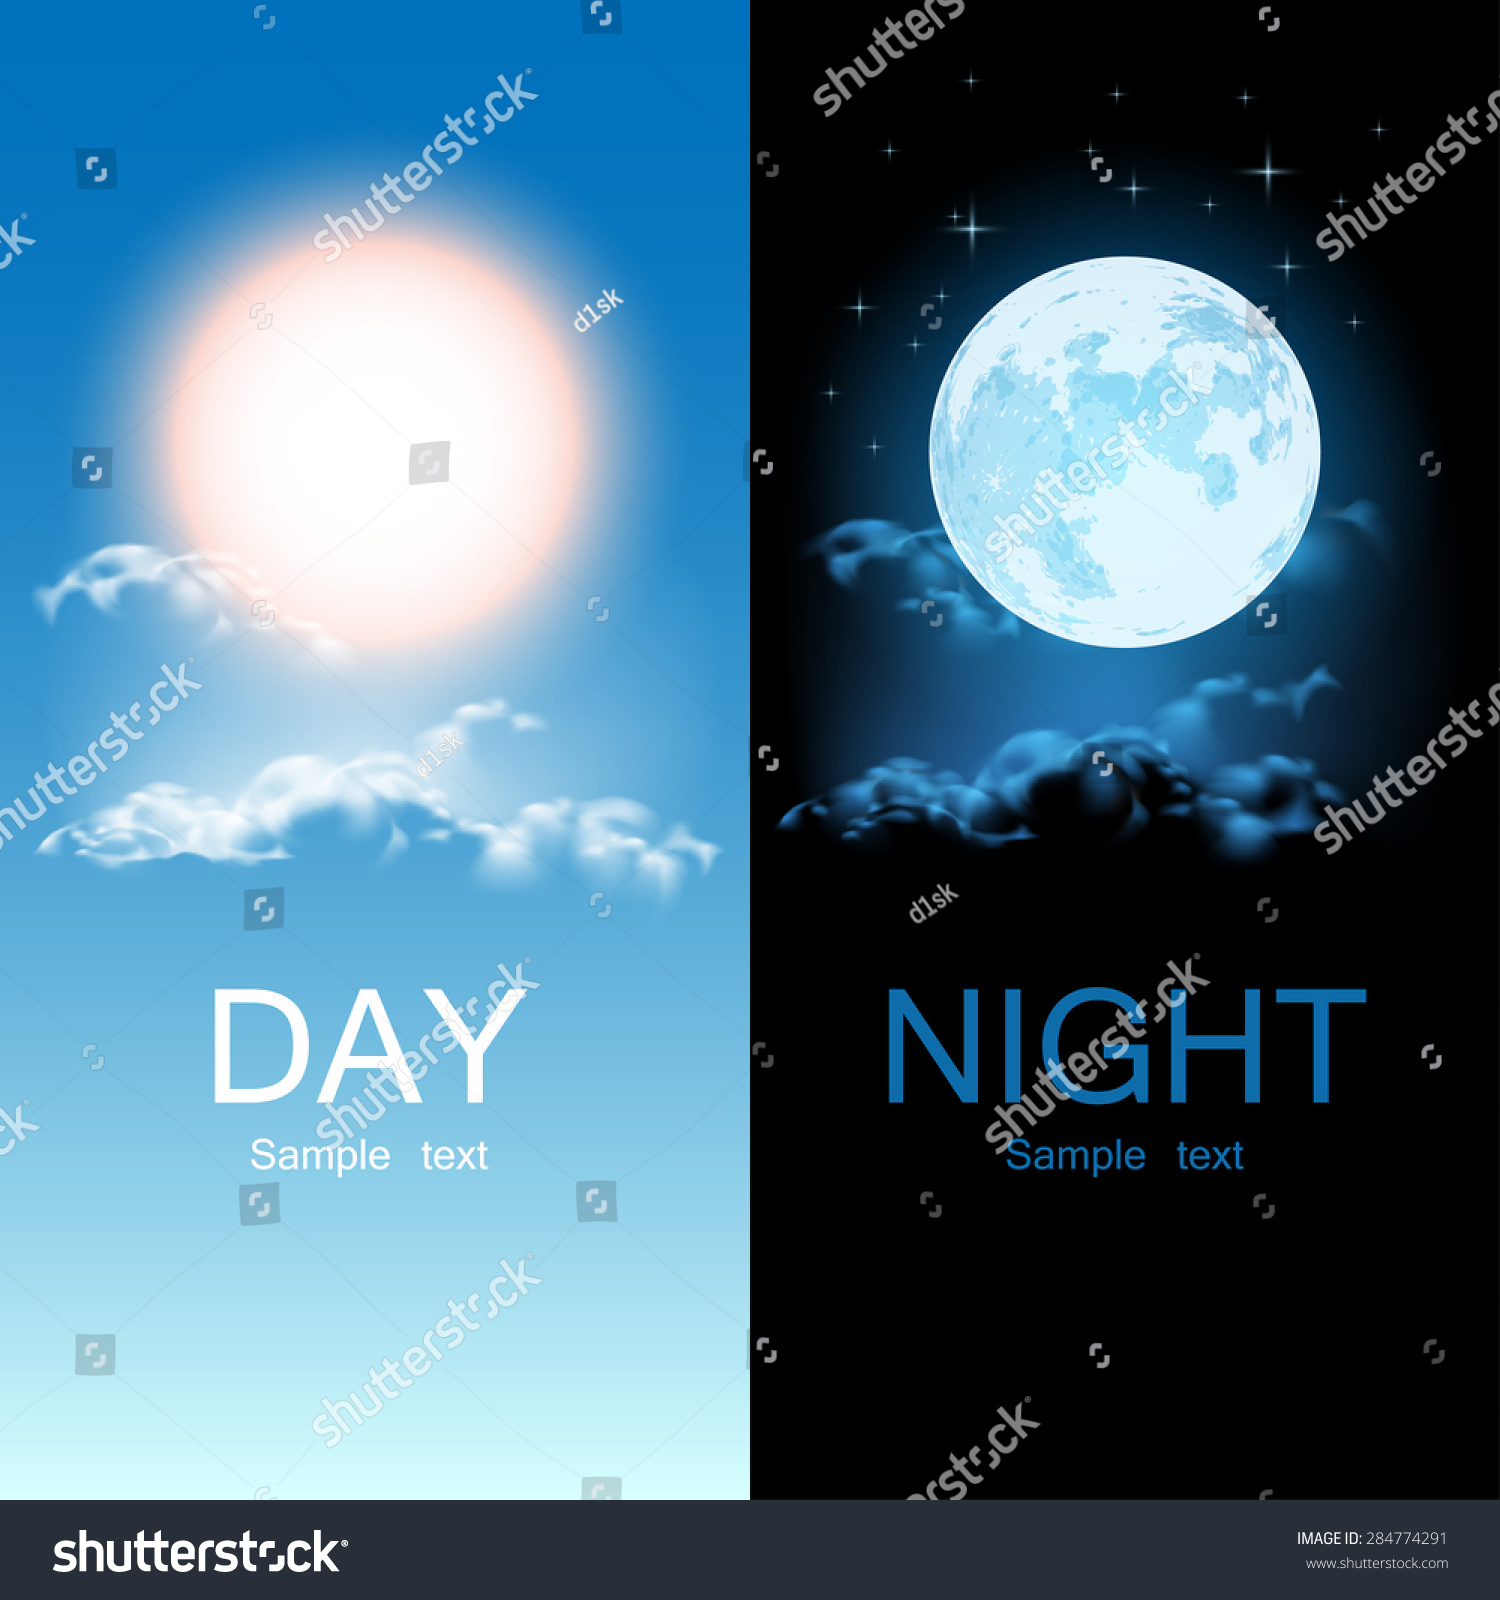 Day and night illustration #284774291